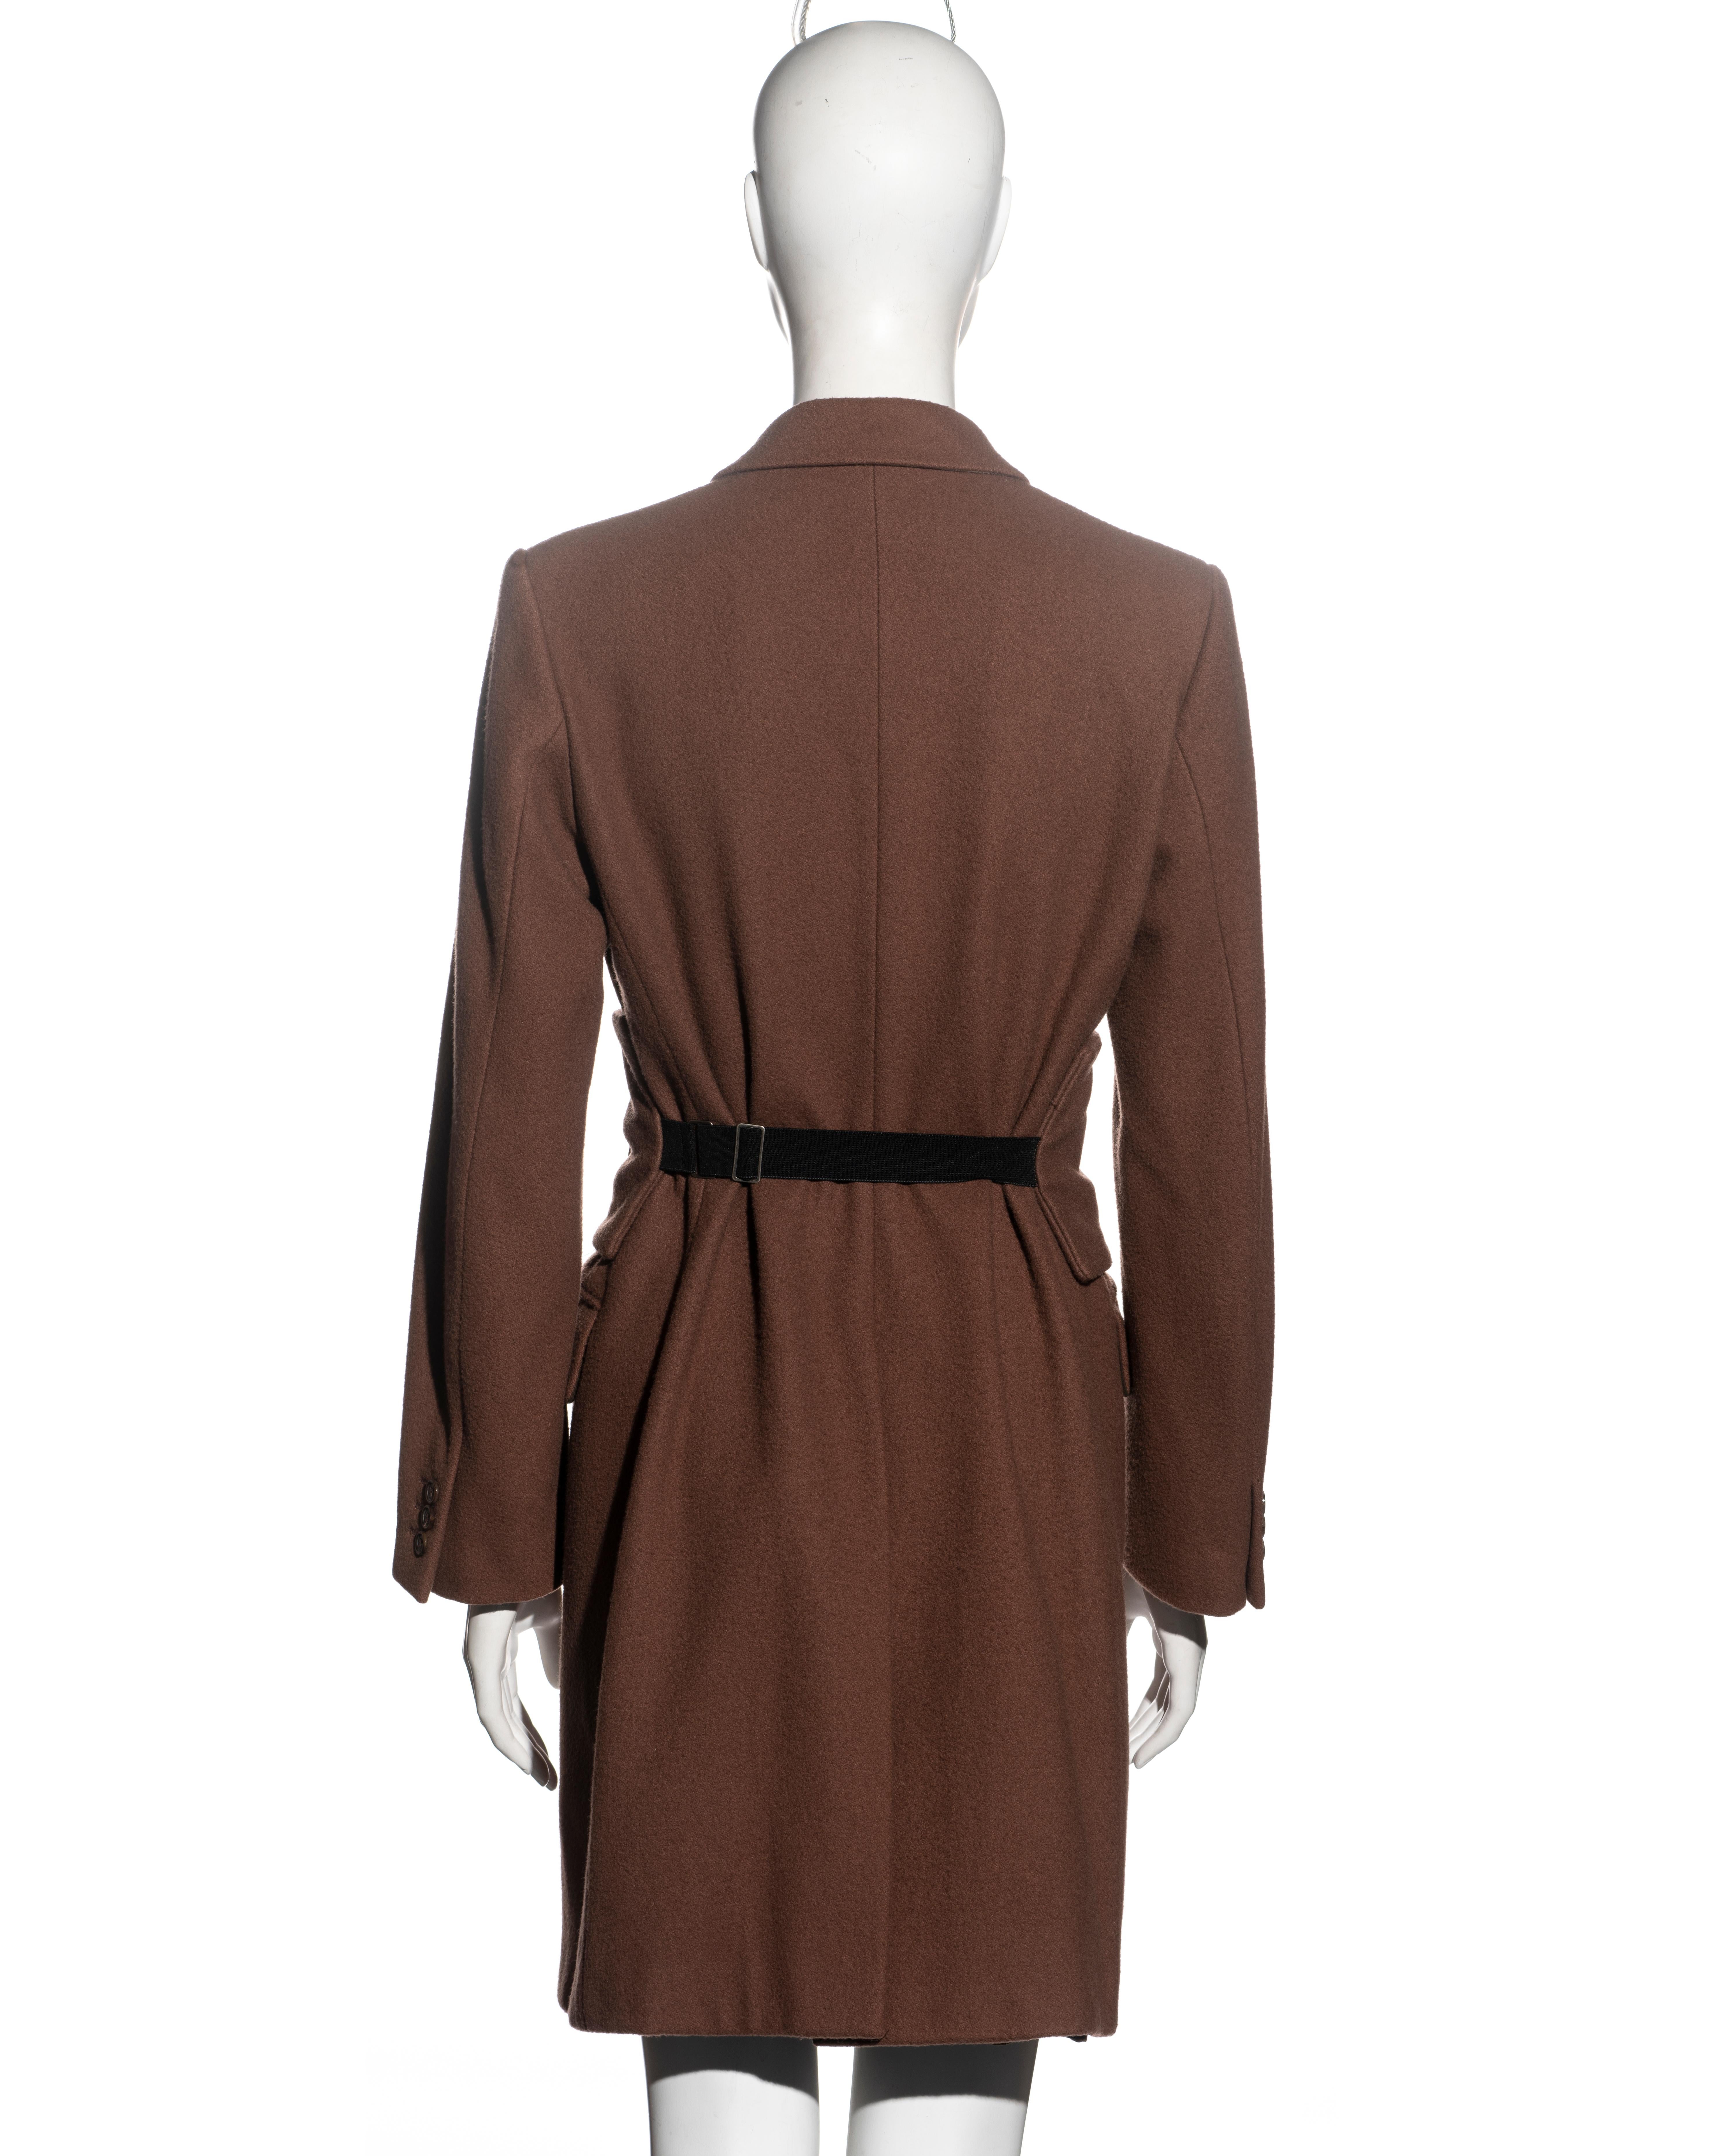 Martin Margiela brown wool coat with matching oversized belt, fw 1996 For Sale 6